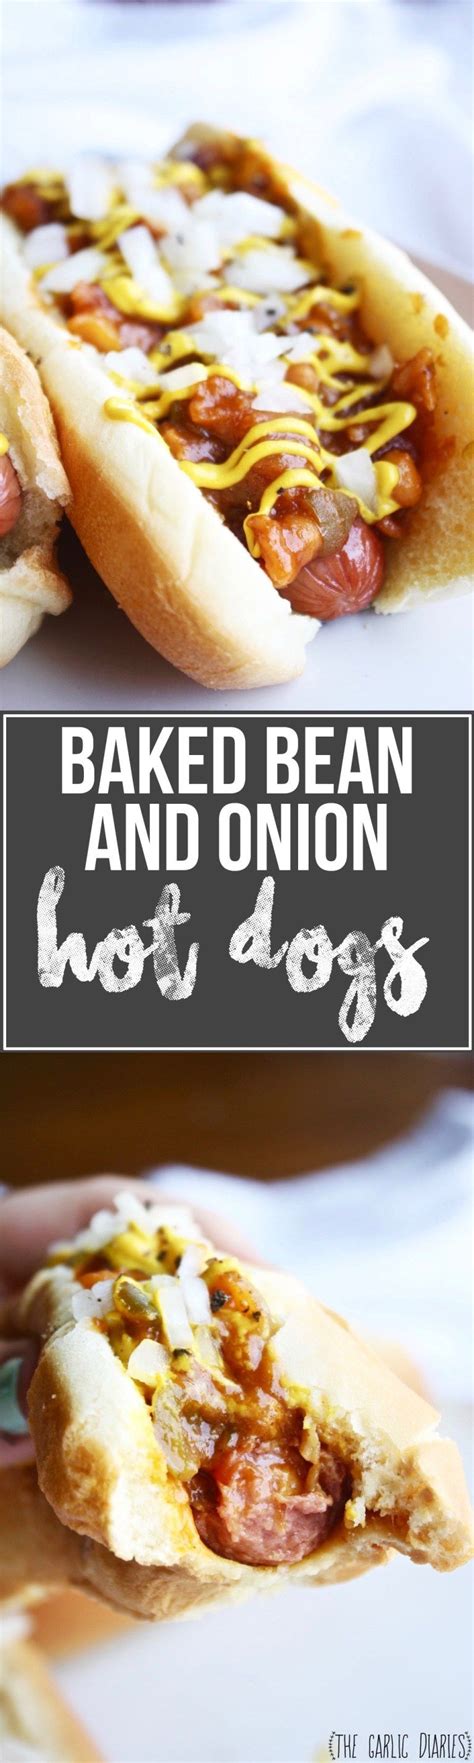 Is hot fogs& beans heslthy. Baked Bean and Onion Dogs | Recipe | Baked beans, Hot dog buns, 30 minute meals